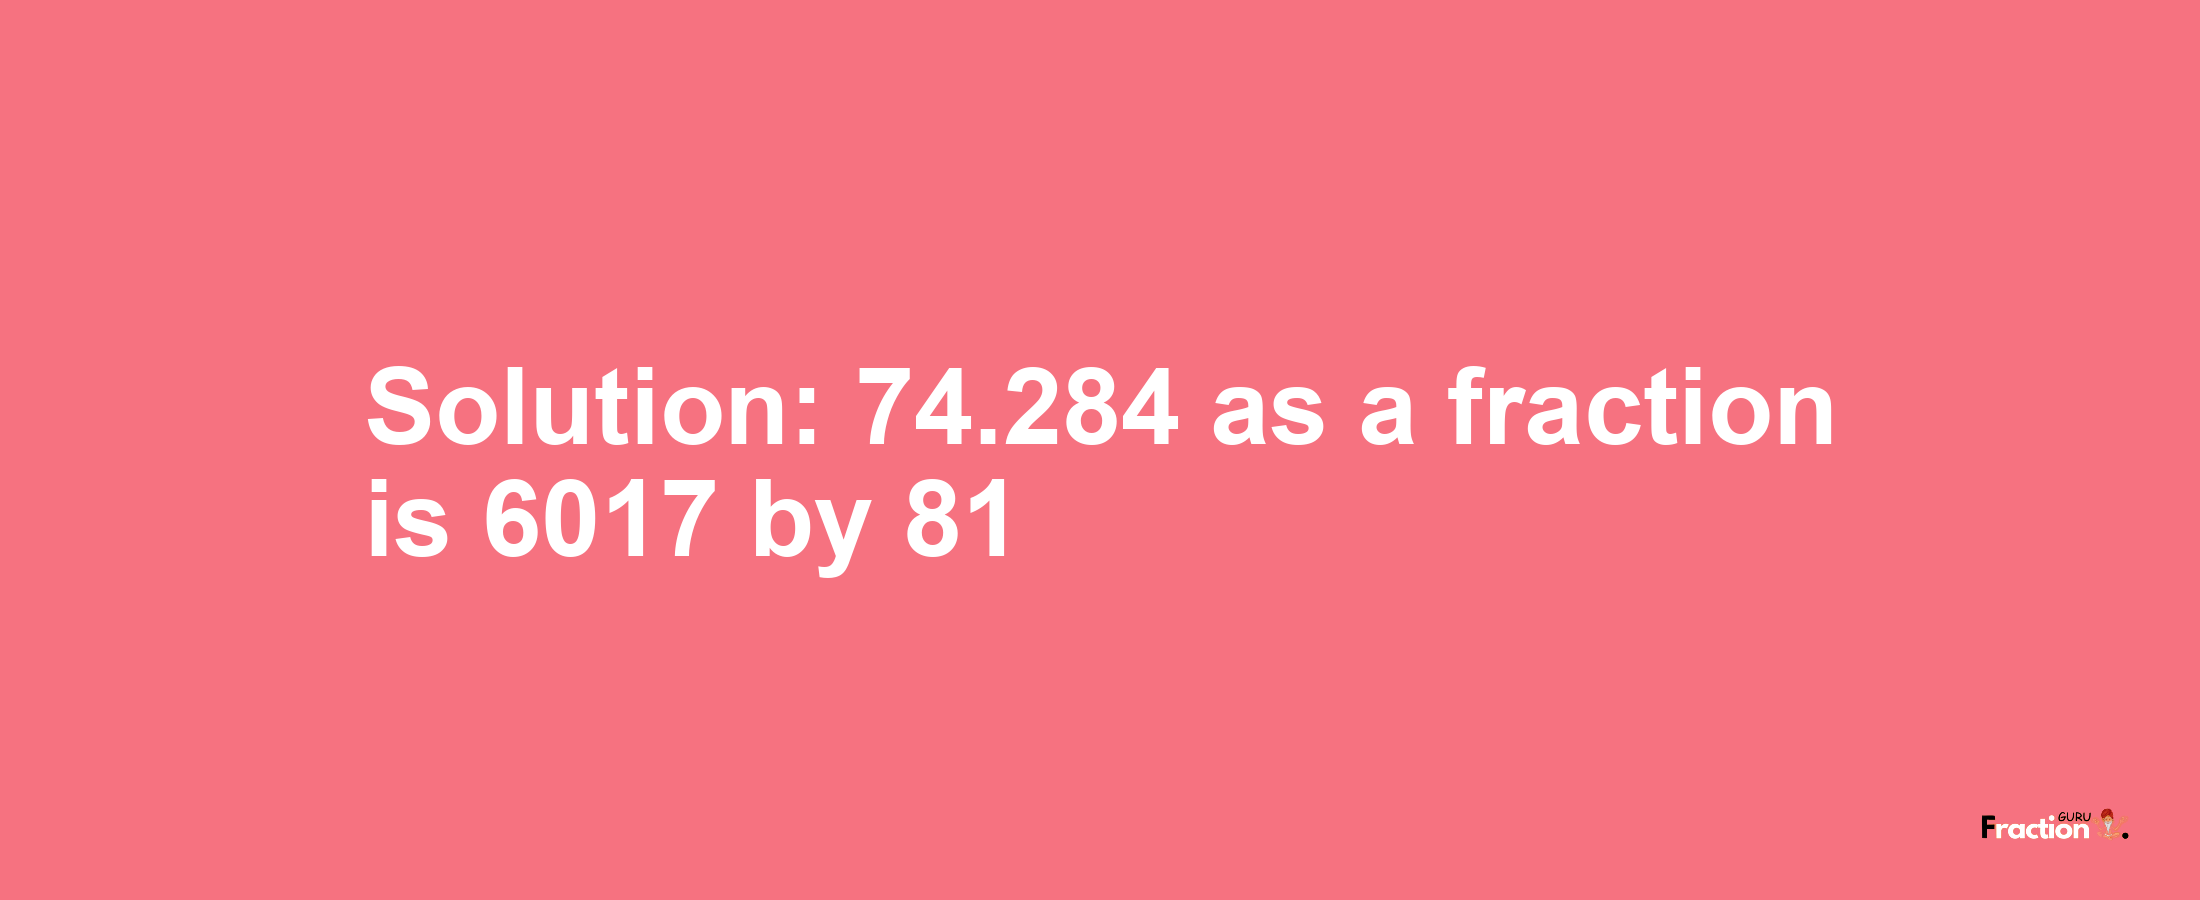 Solution:74.284 as a fraction is 6017/81